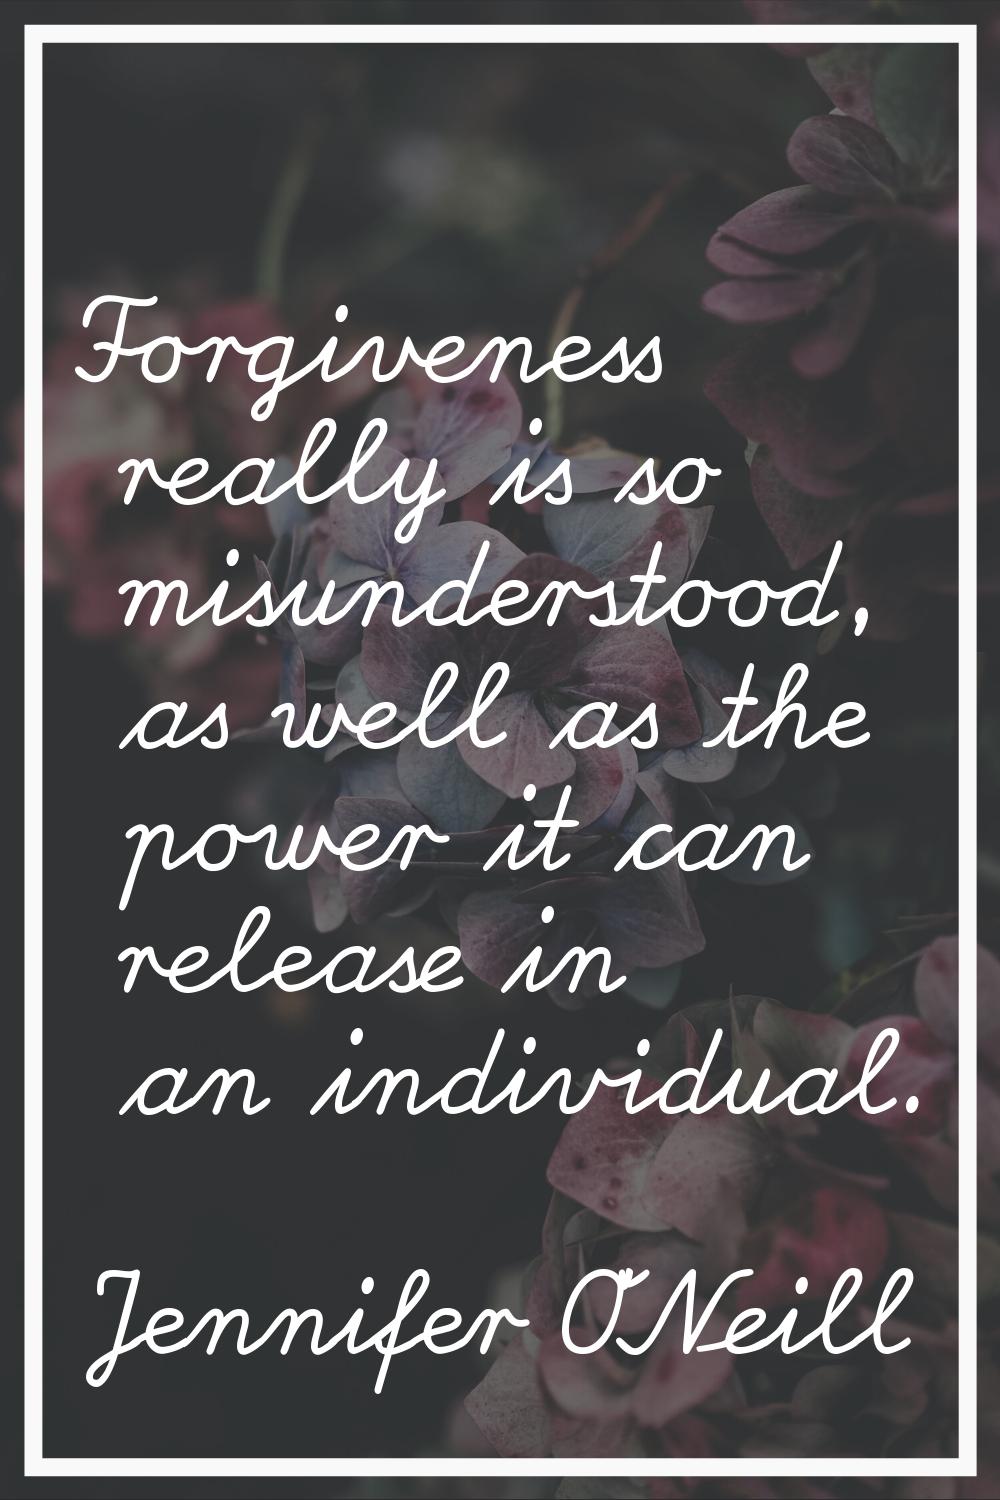 Forgiveness really is so misunderstood, as well as the power it can release in an individual.